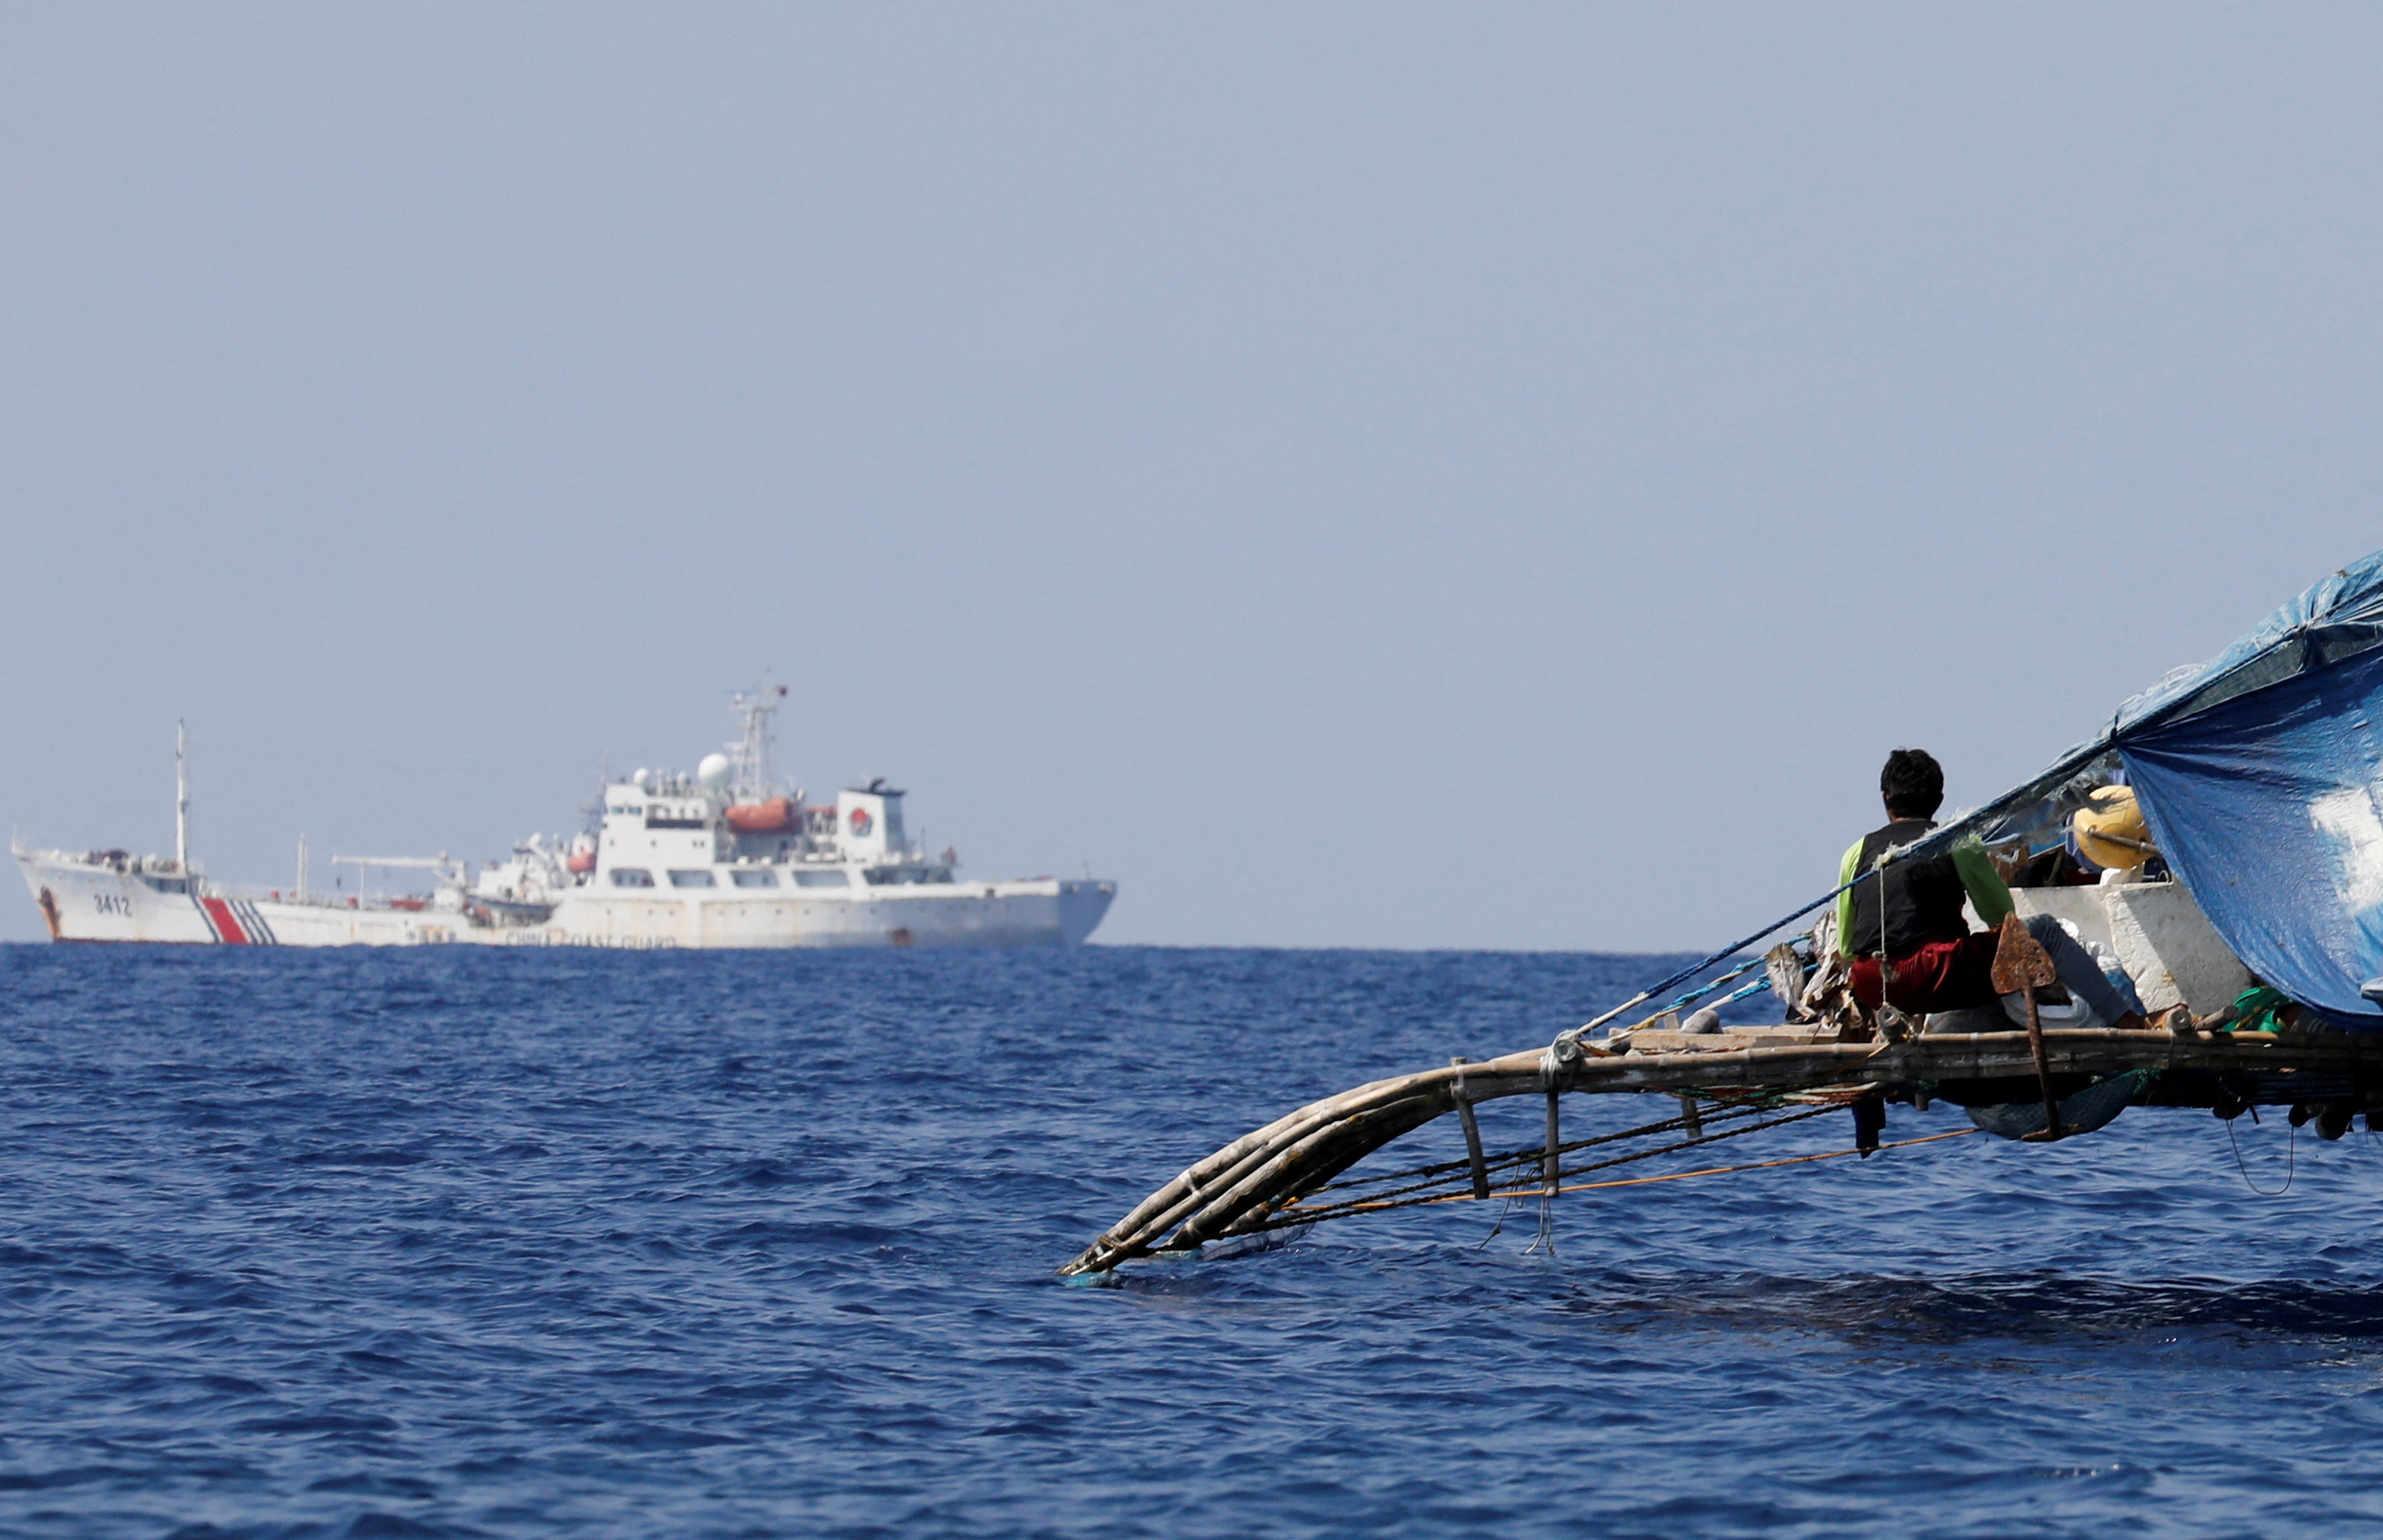 A Philippine fisherman watches a China Coast Guard vessel patrolling the disputed Scarborough Shoal